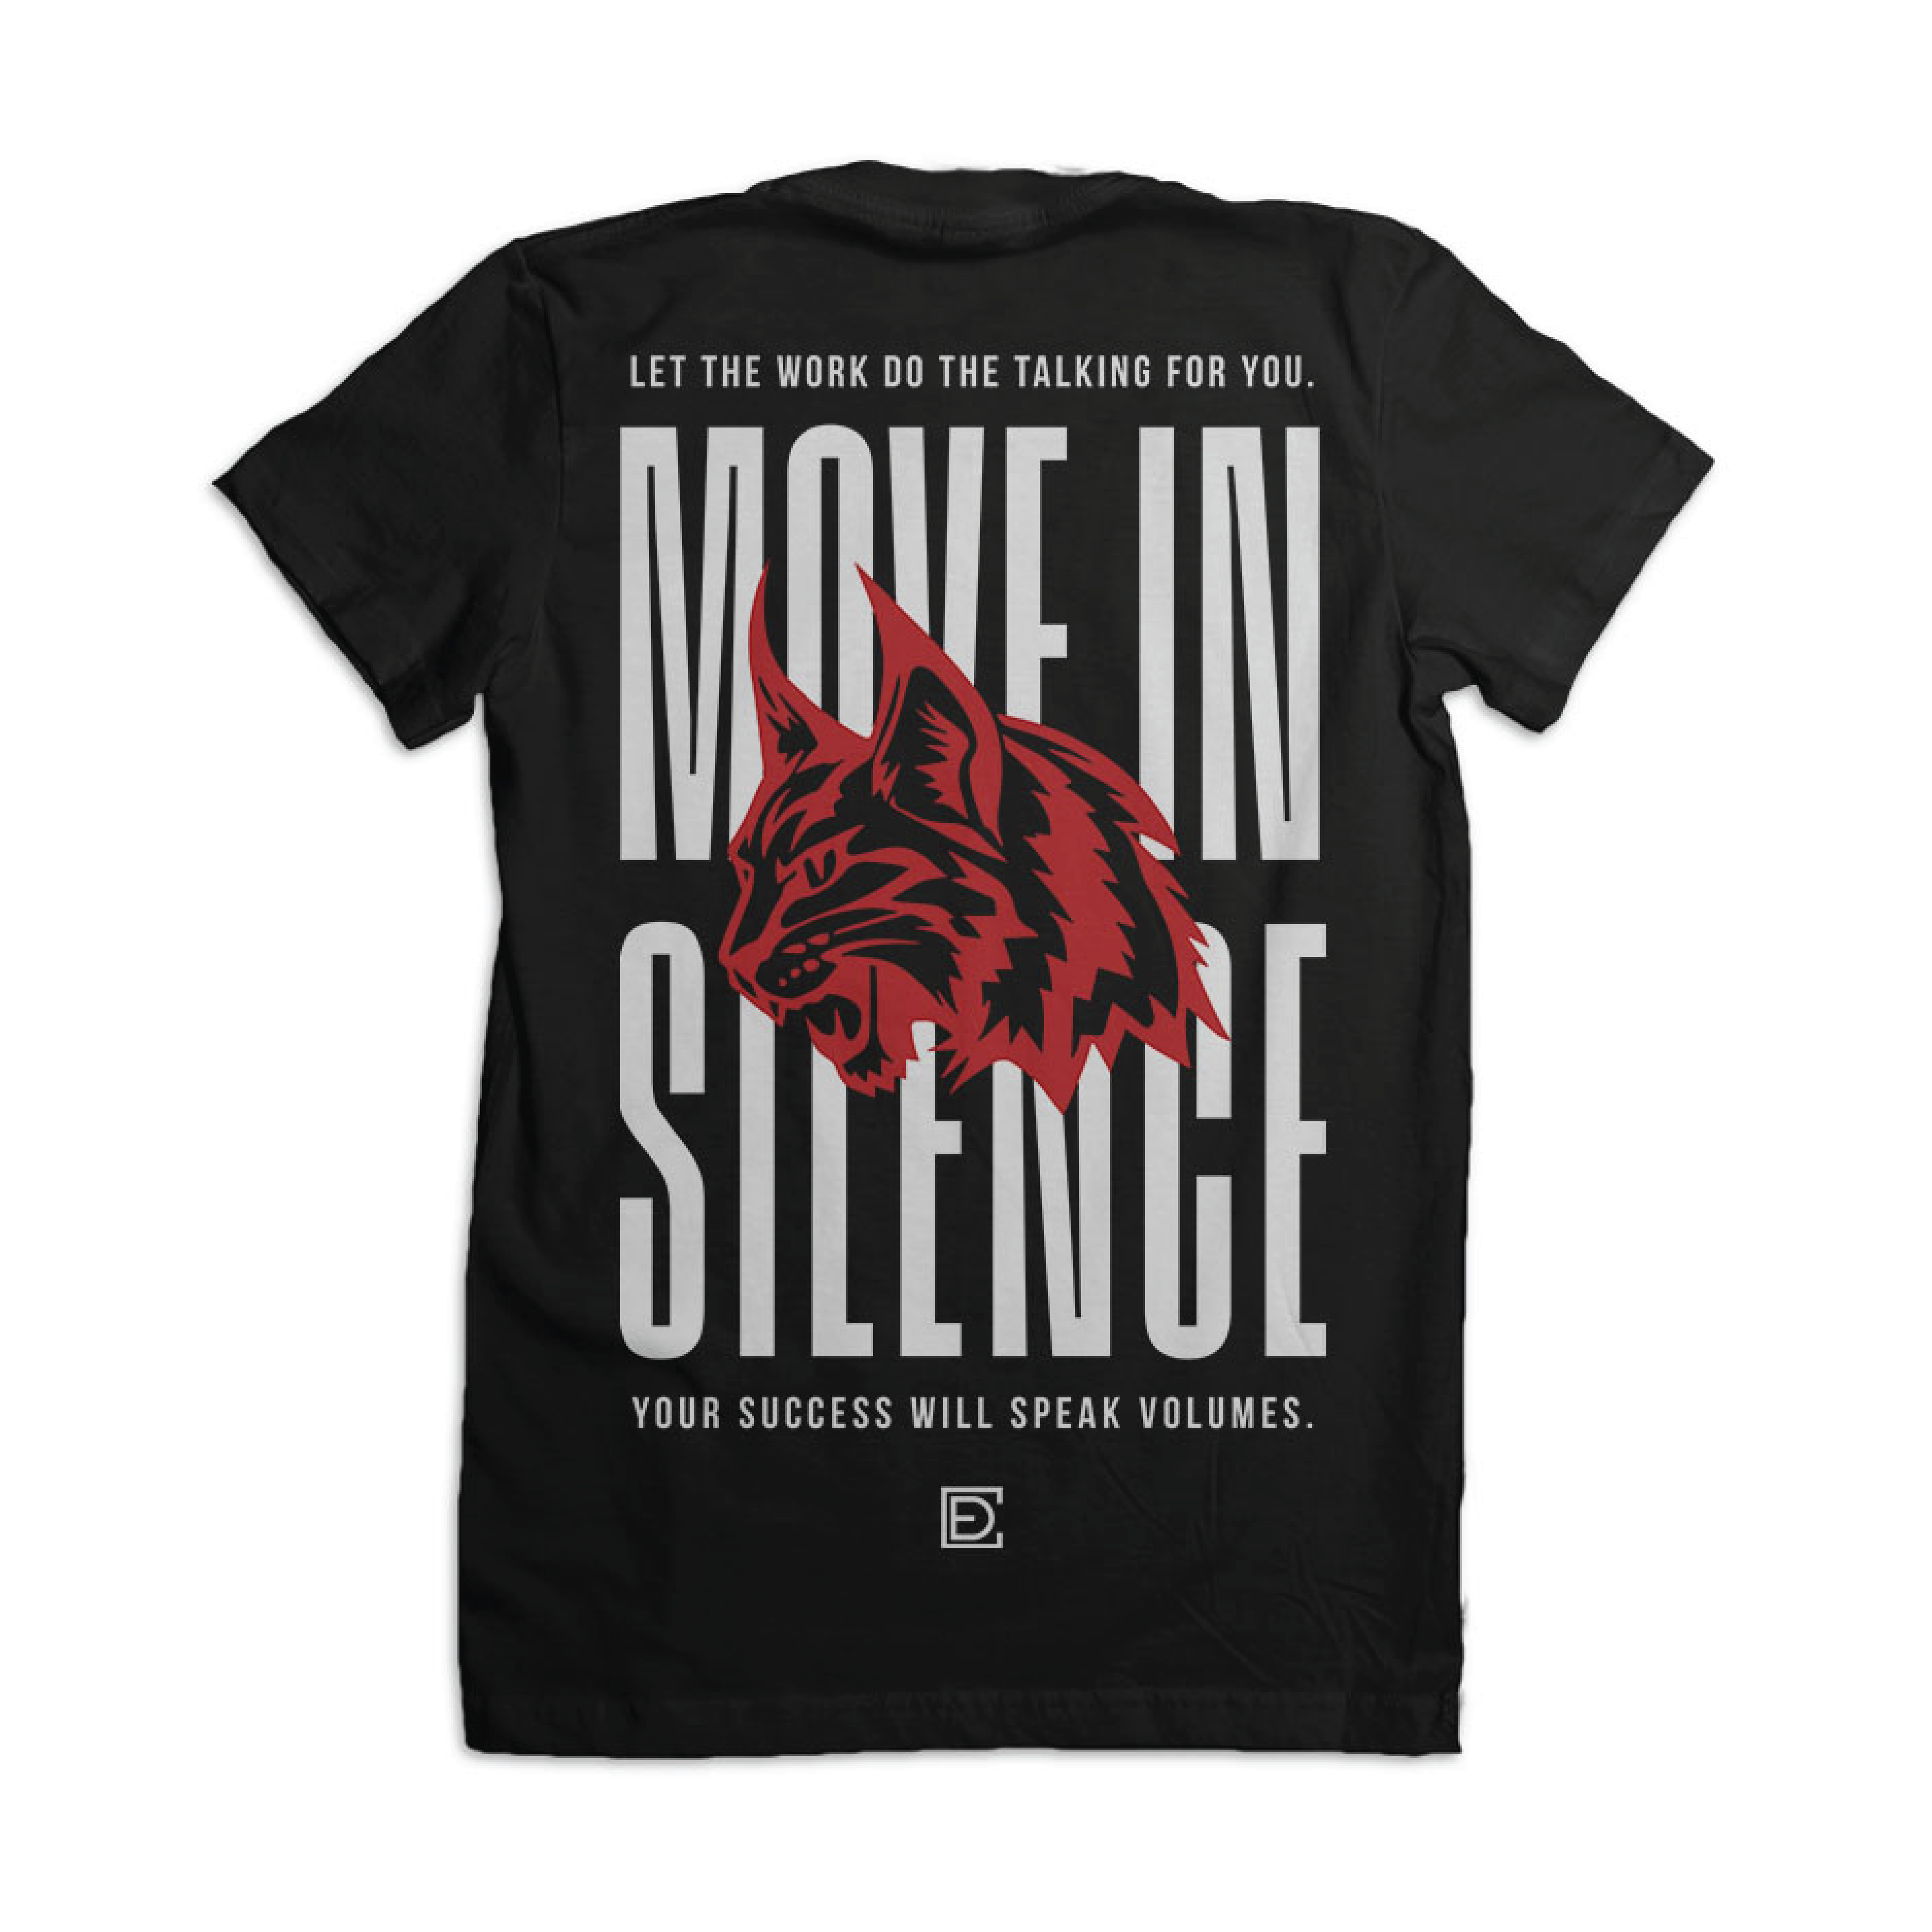 Move in Silence (Women's Small)